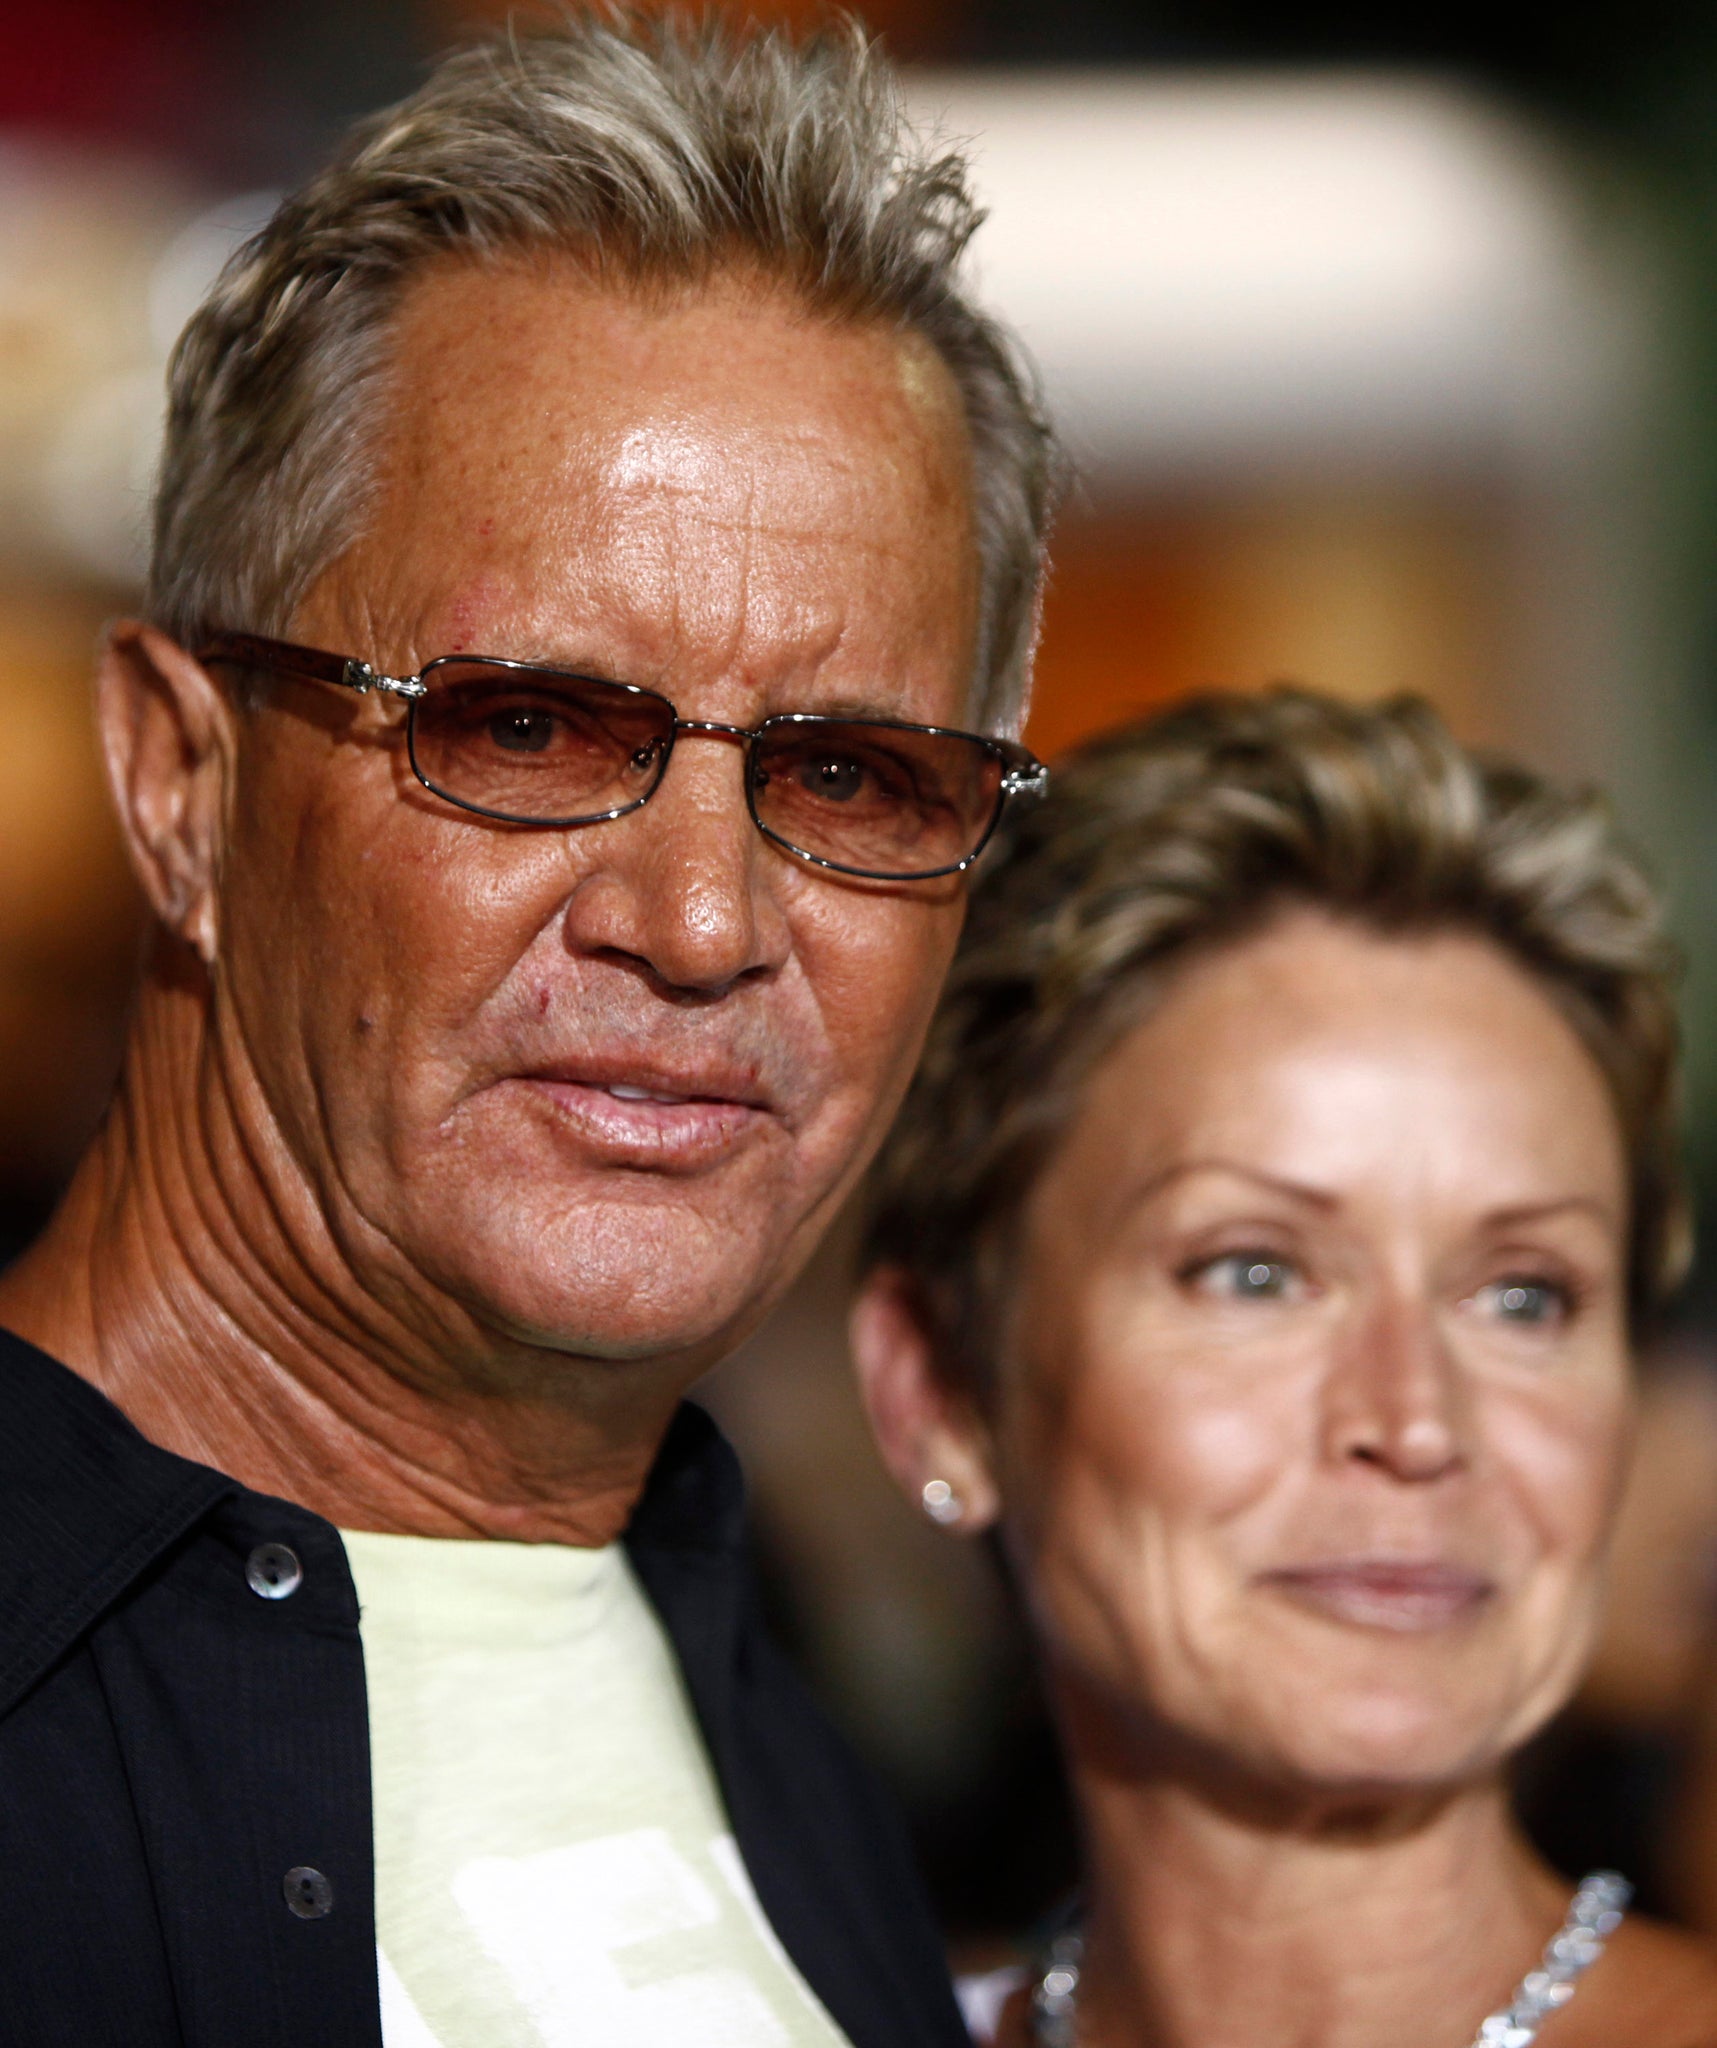 Director David R. Ellis, left, and his wife, Cindy, arrive at the premiere of "The Final Destination" in Los Angeles.